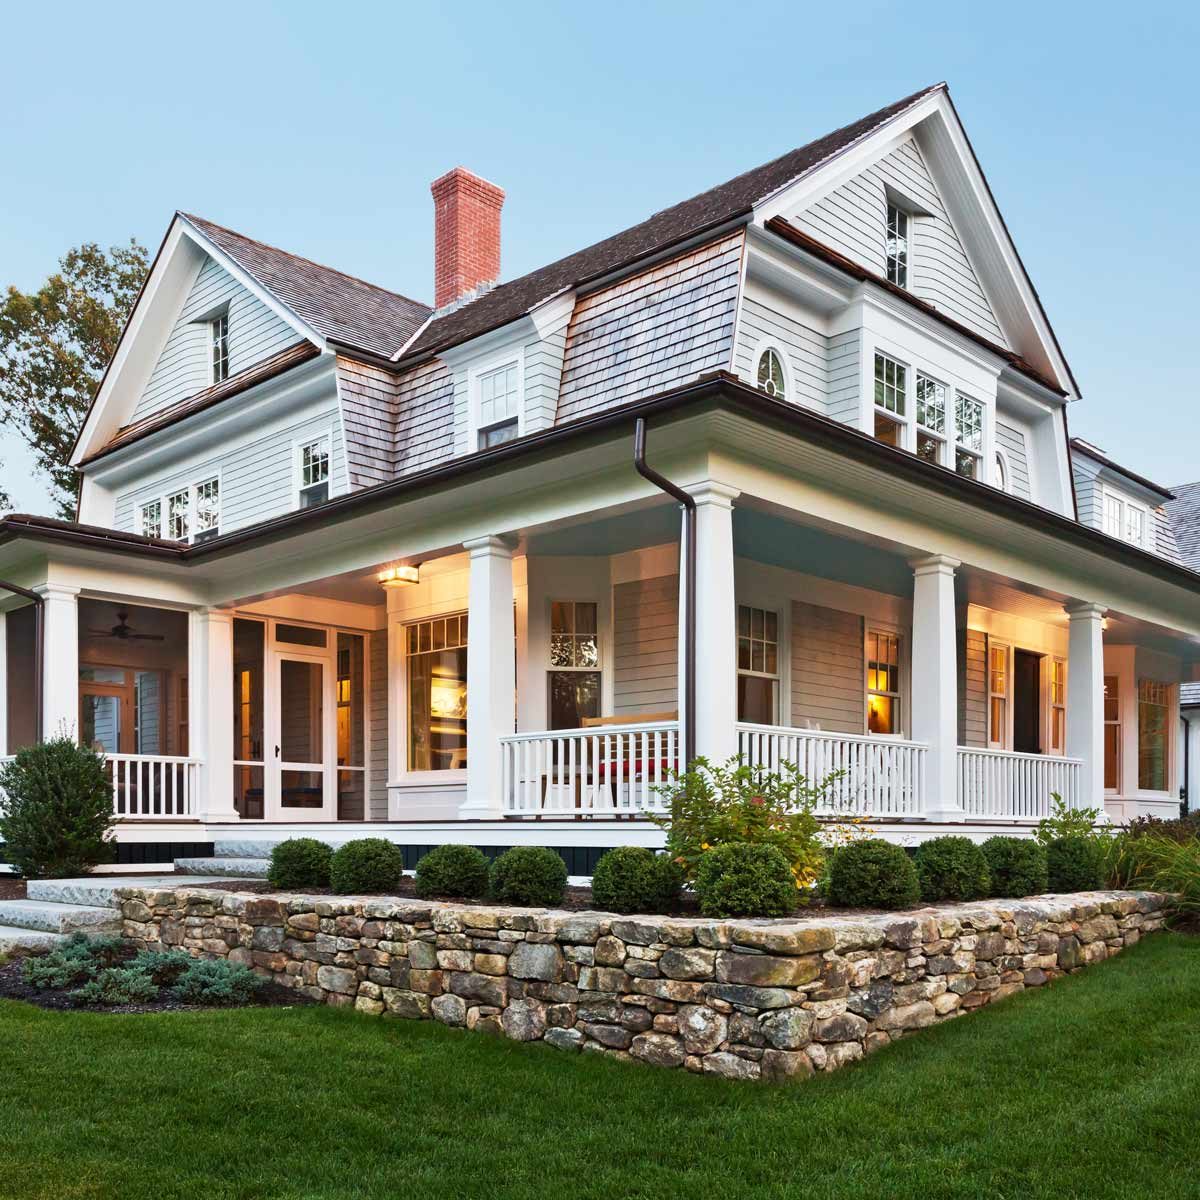 Types Of Exterior Home Styles - BEST DESIGN TATOOS